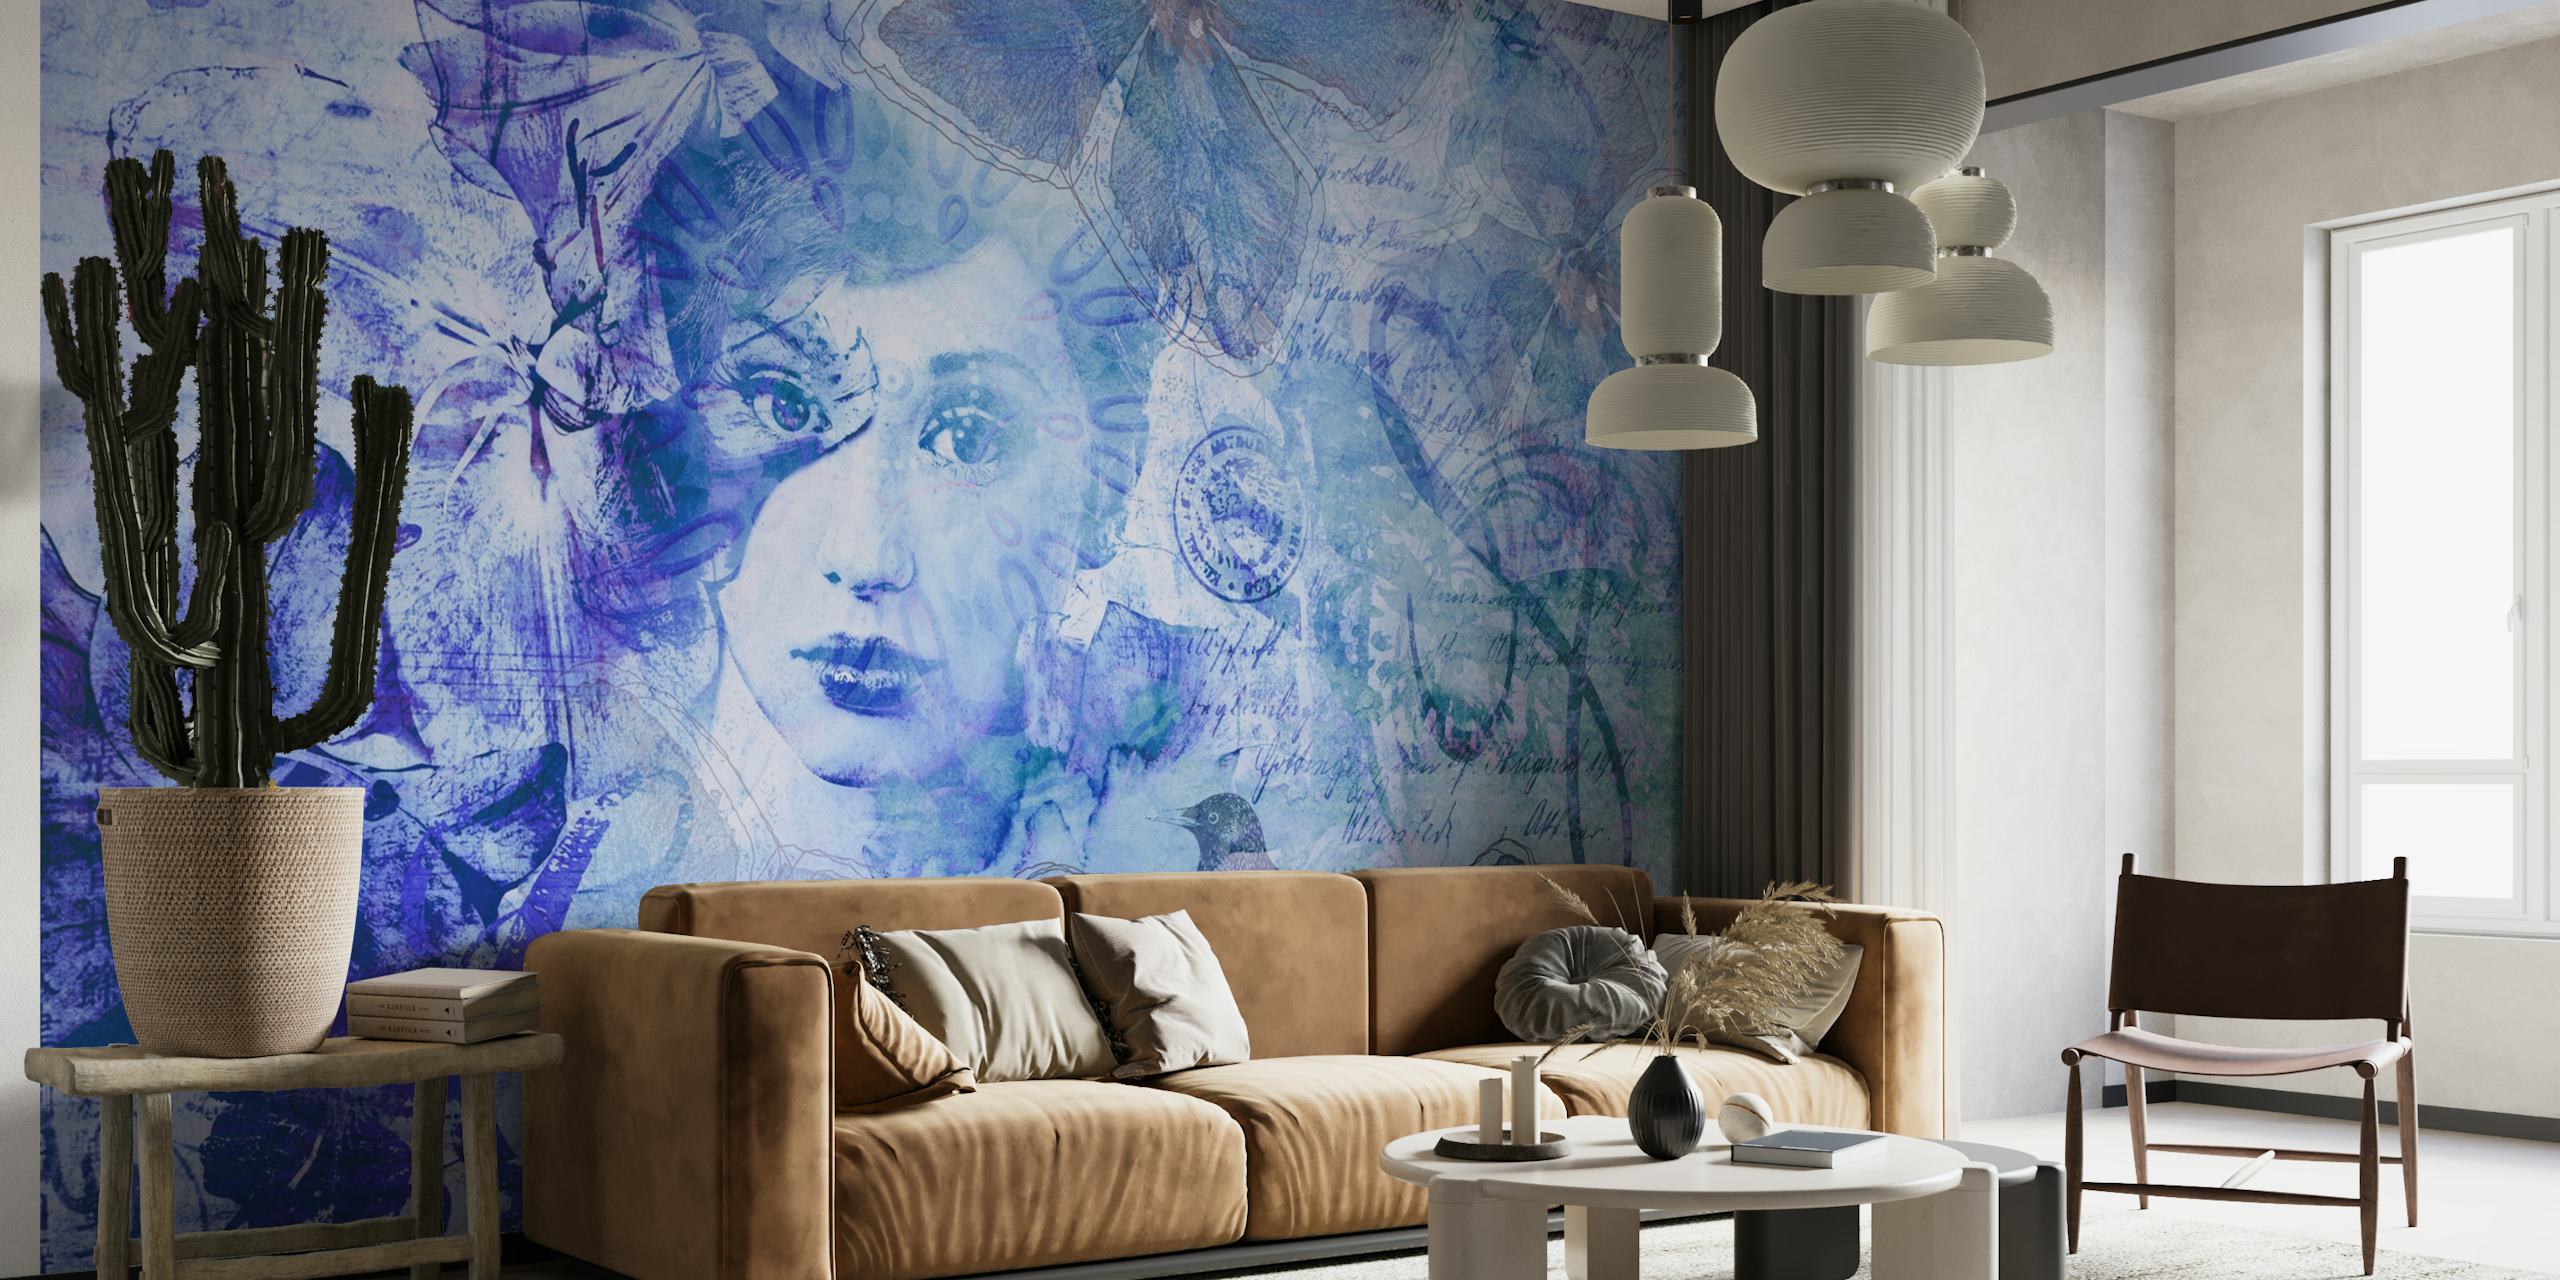 Ethereal blue-toned mural with a woman's face and abstract flowers